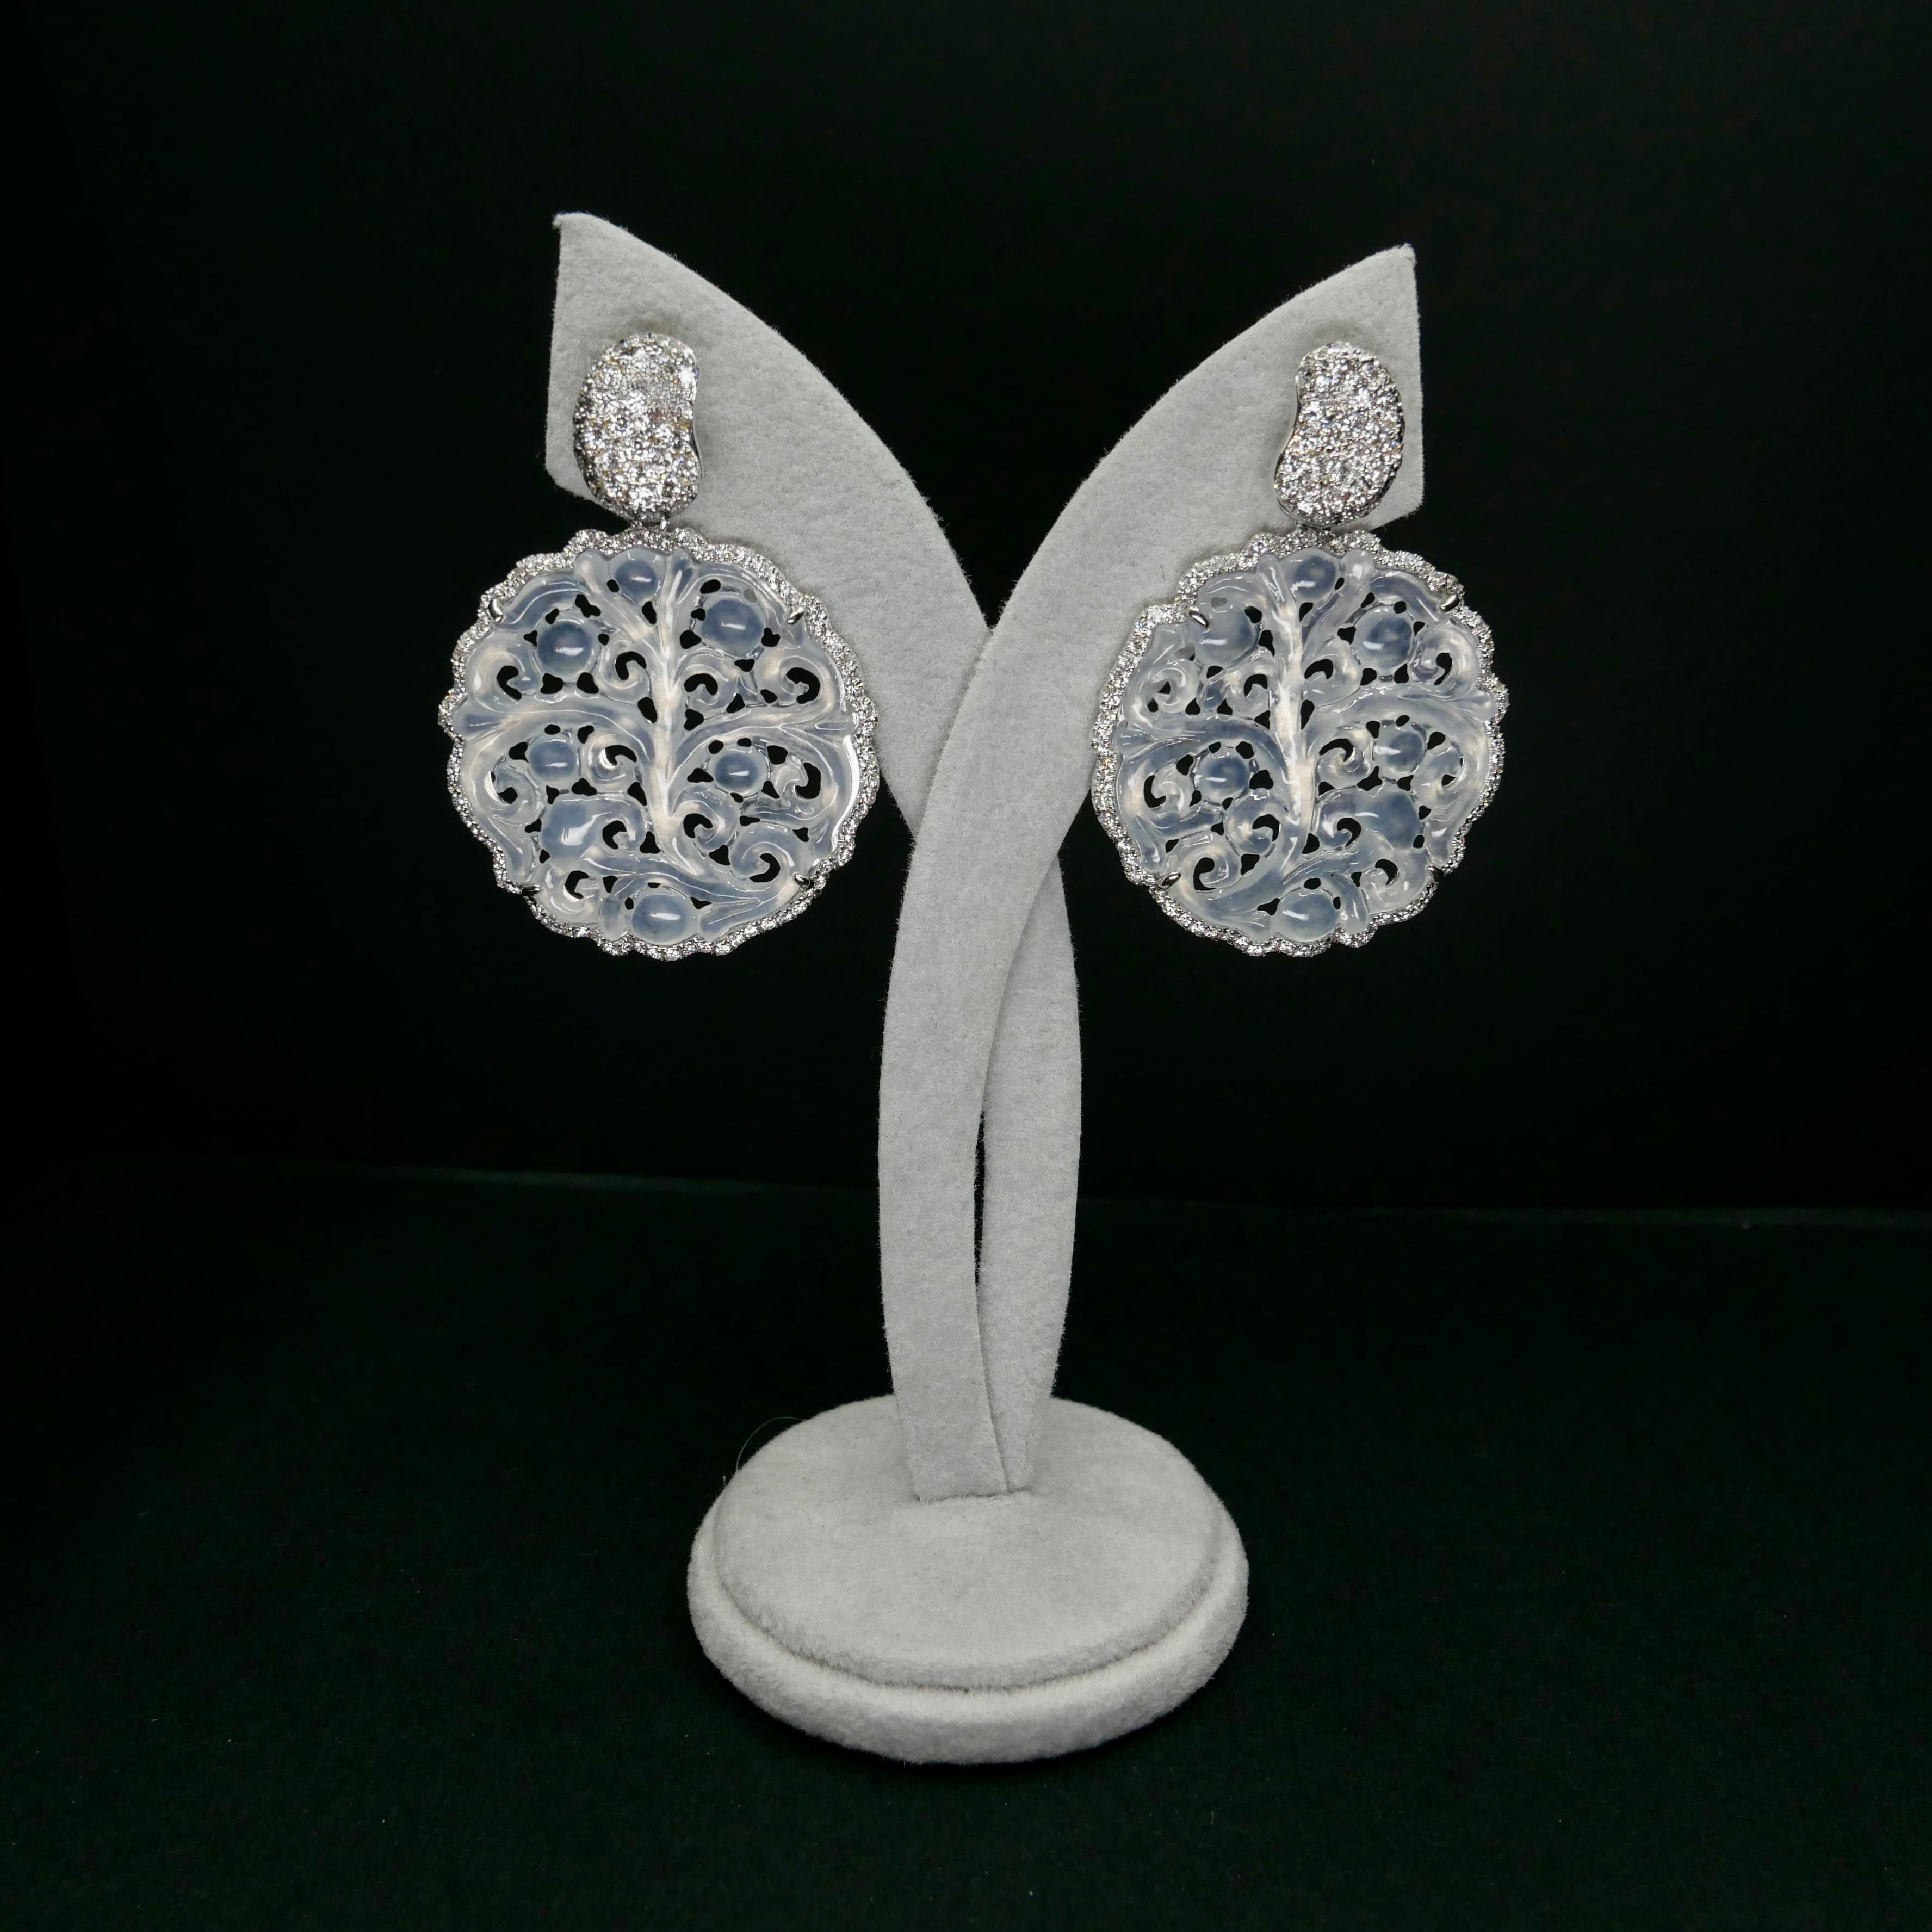 Certified Icy Jade & Diamond Earrings, Colorless, Perfection, Intricate Carving For Sale 5